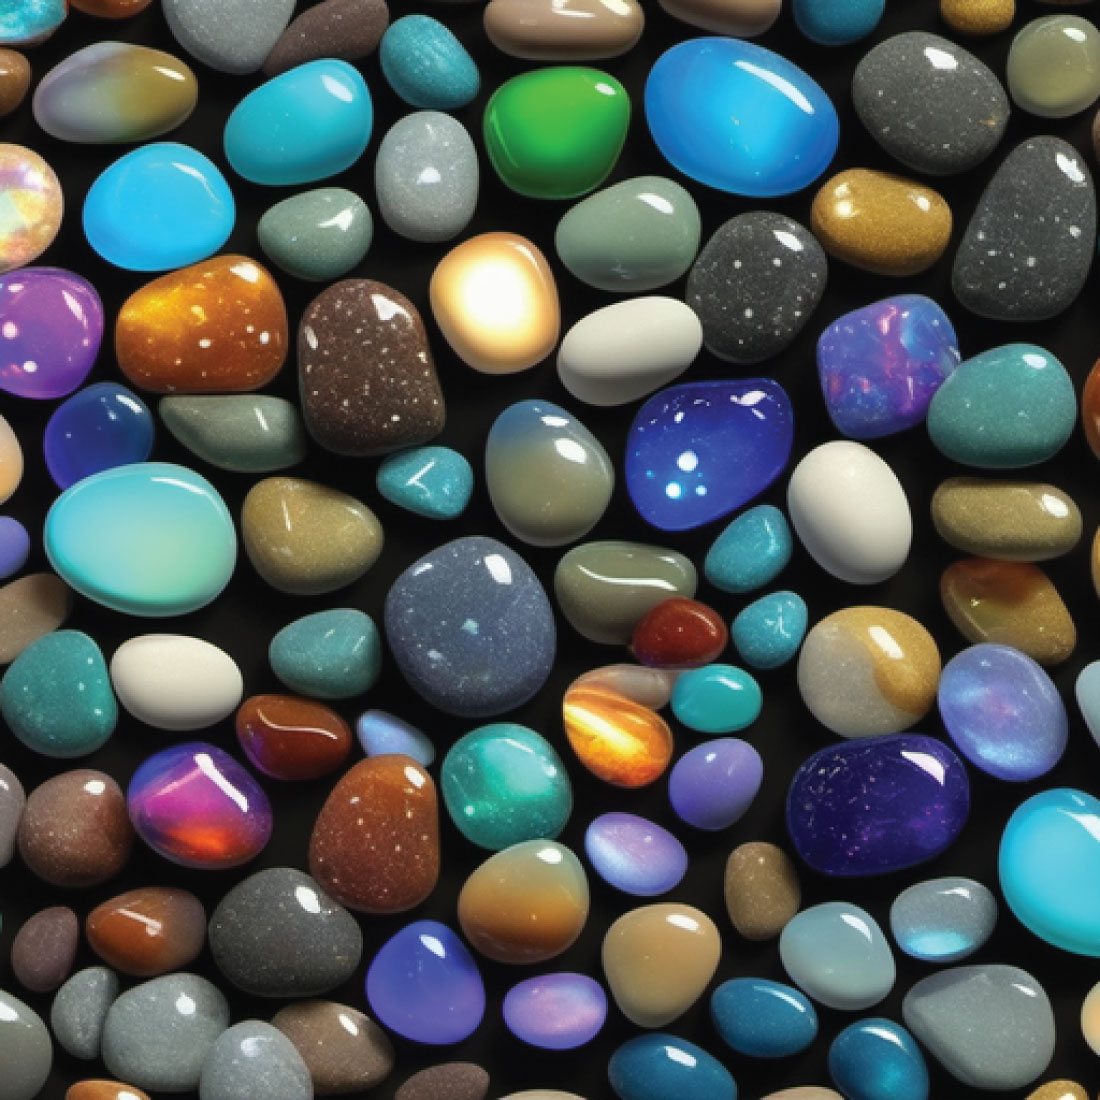 25 set Bundle of shiny glittery pebble stones for 5$ Only preview image.